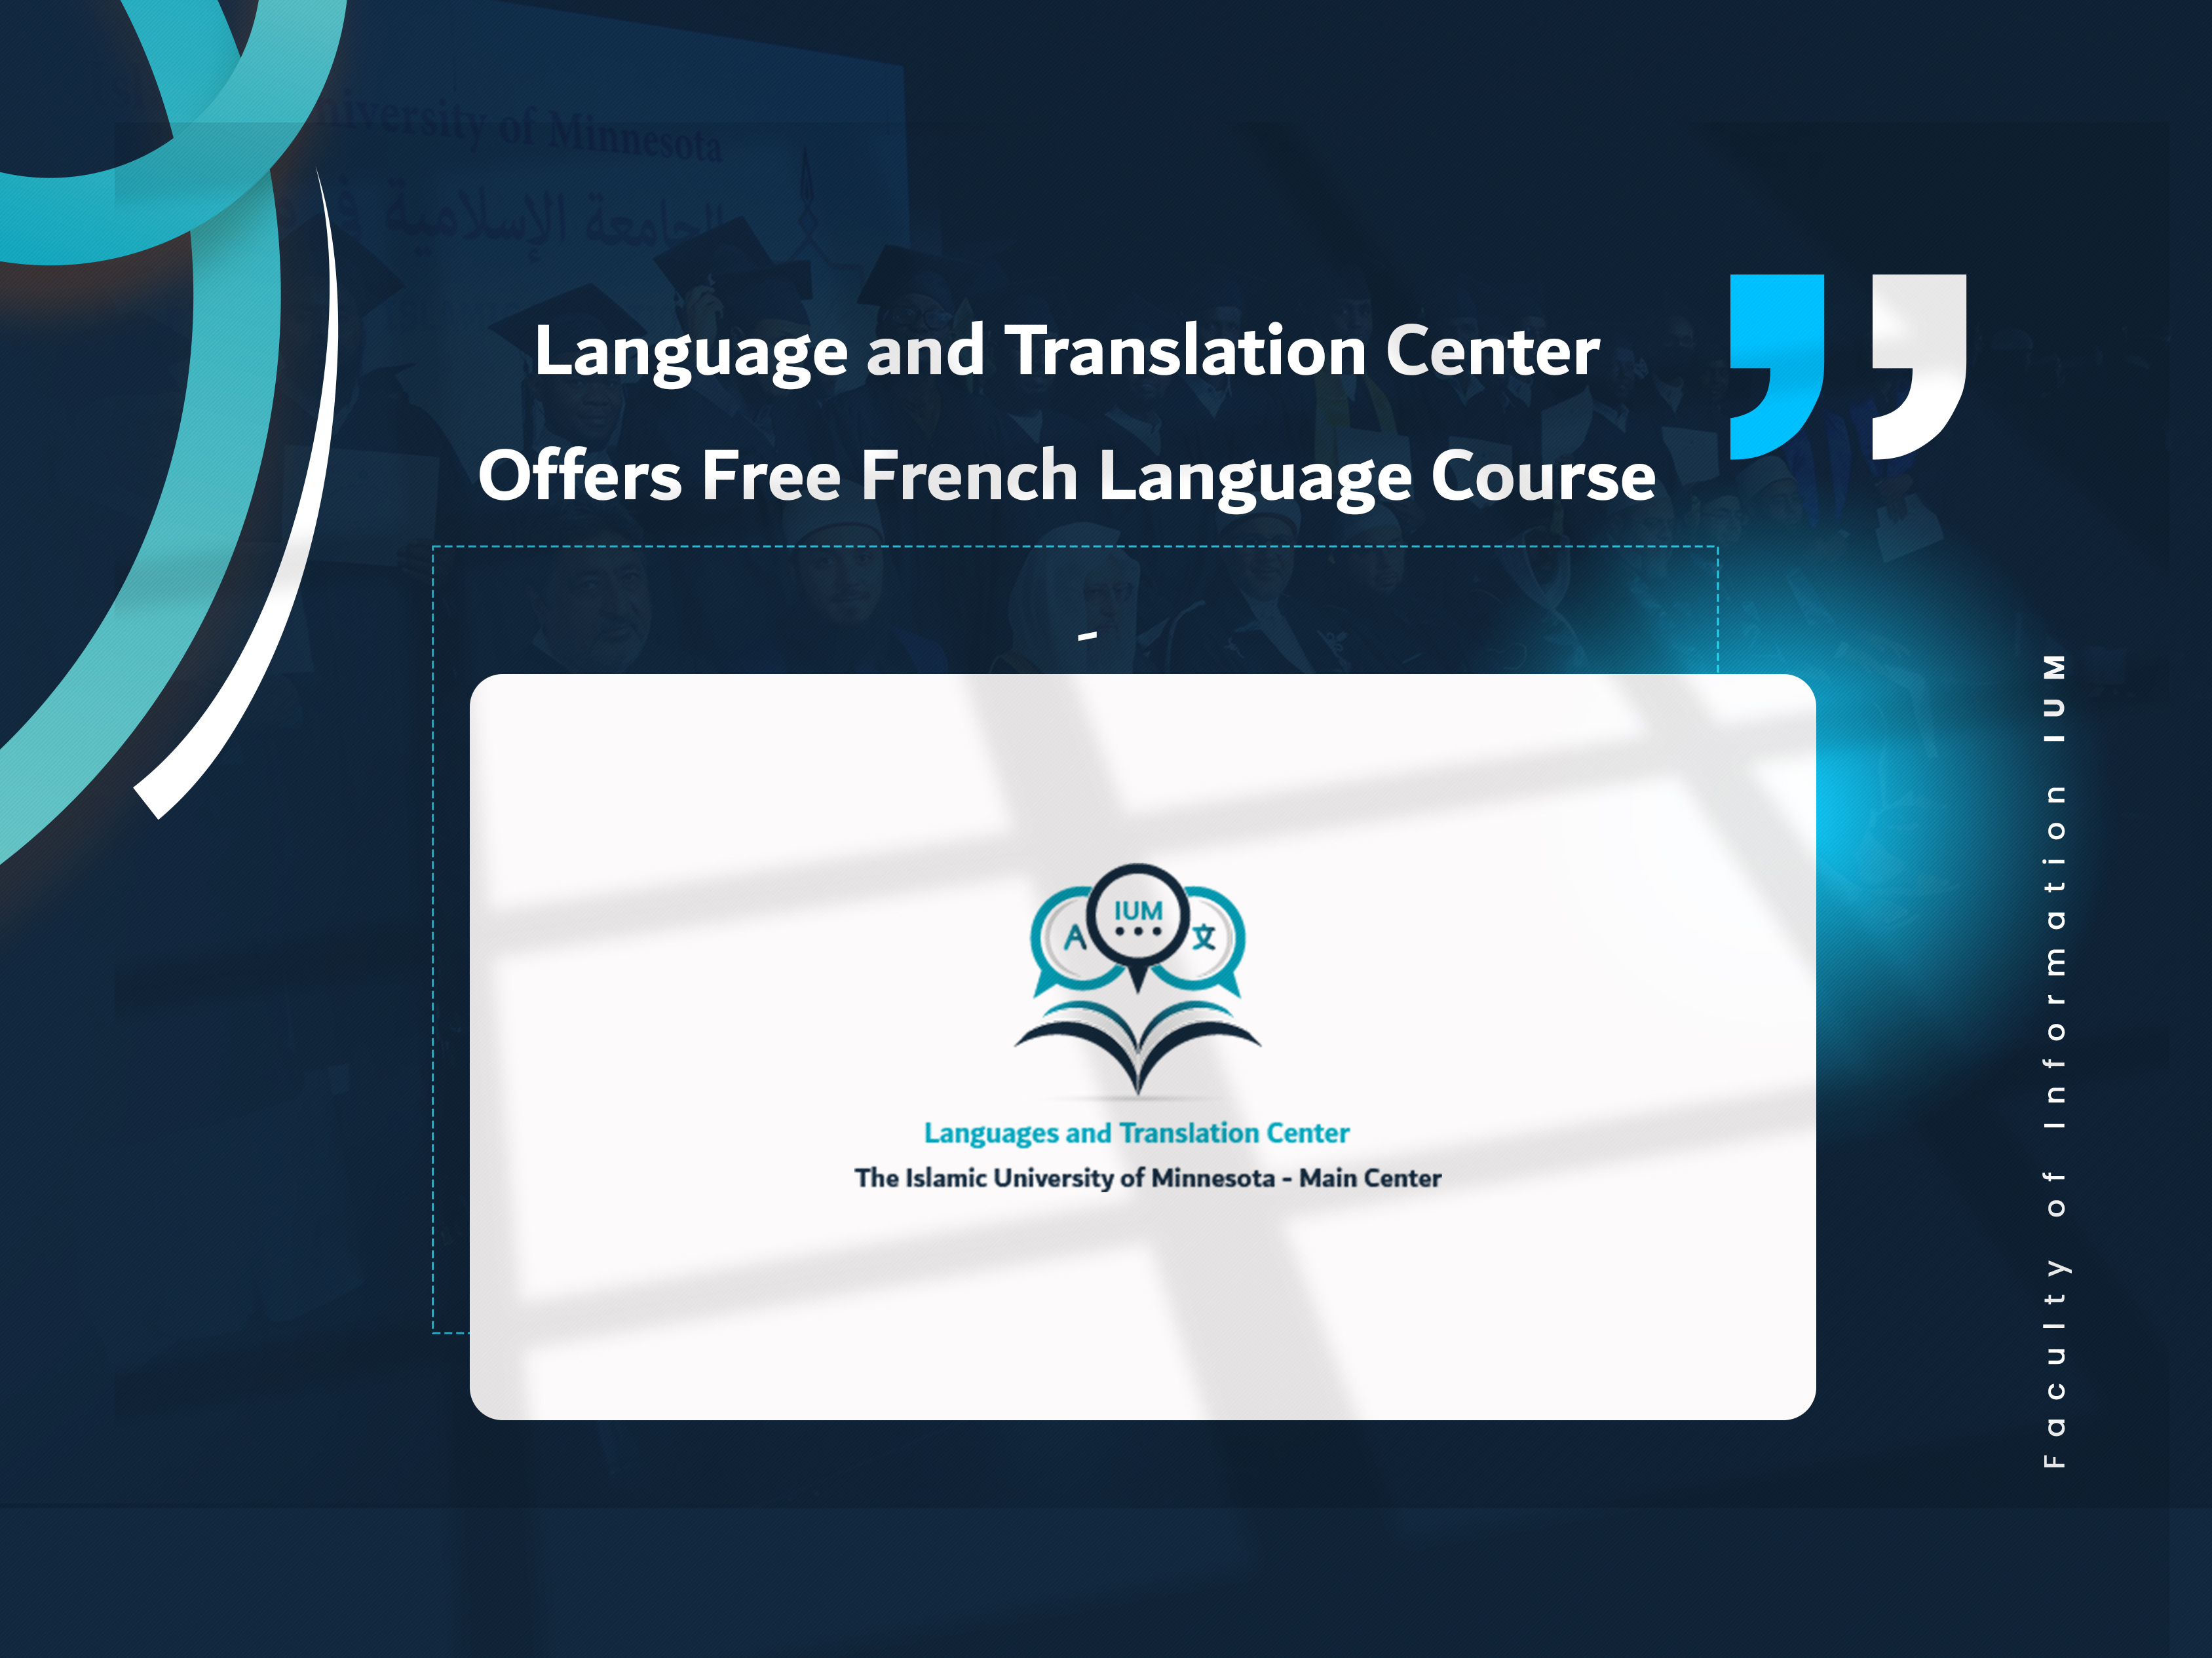 Language and Translation Center Offers Free French Language Course